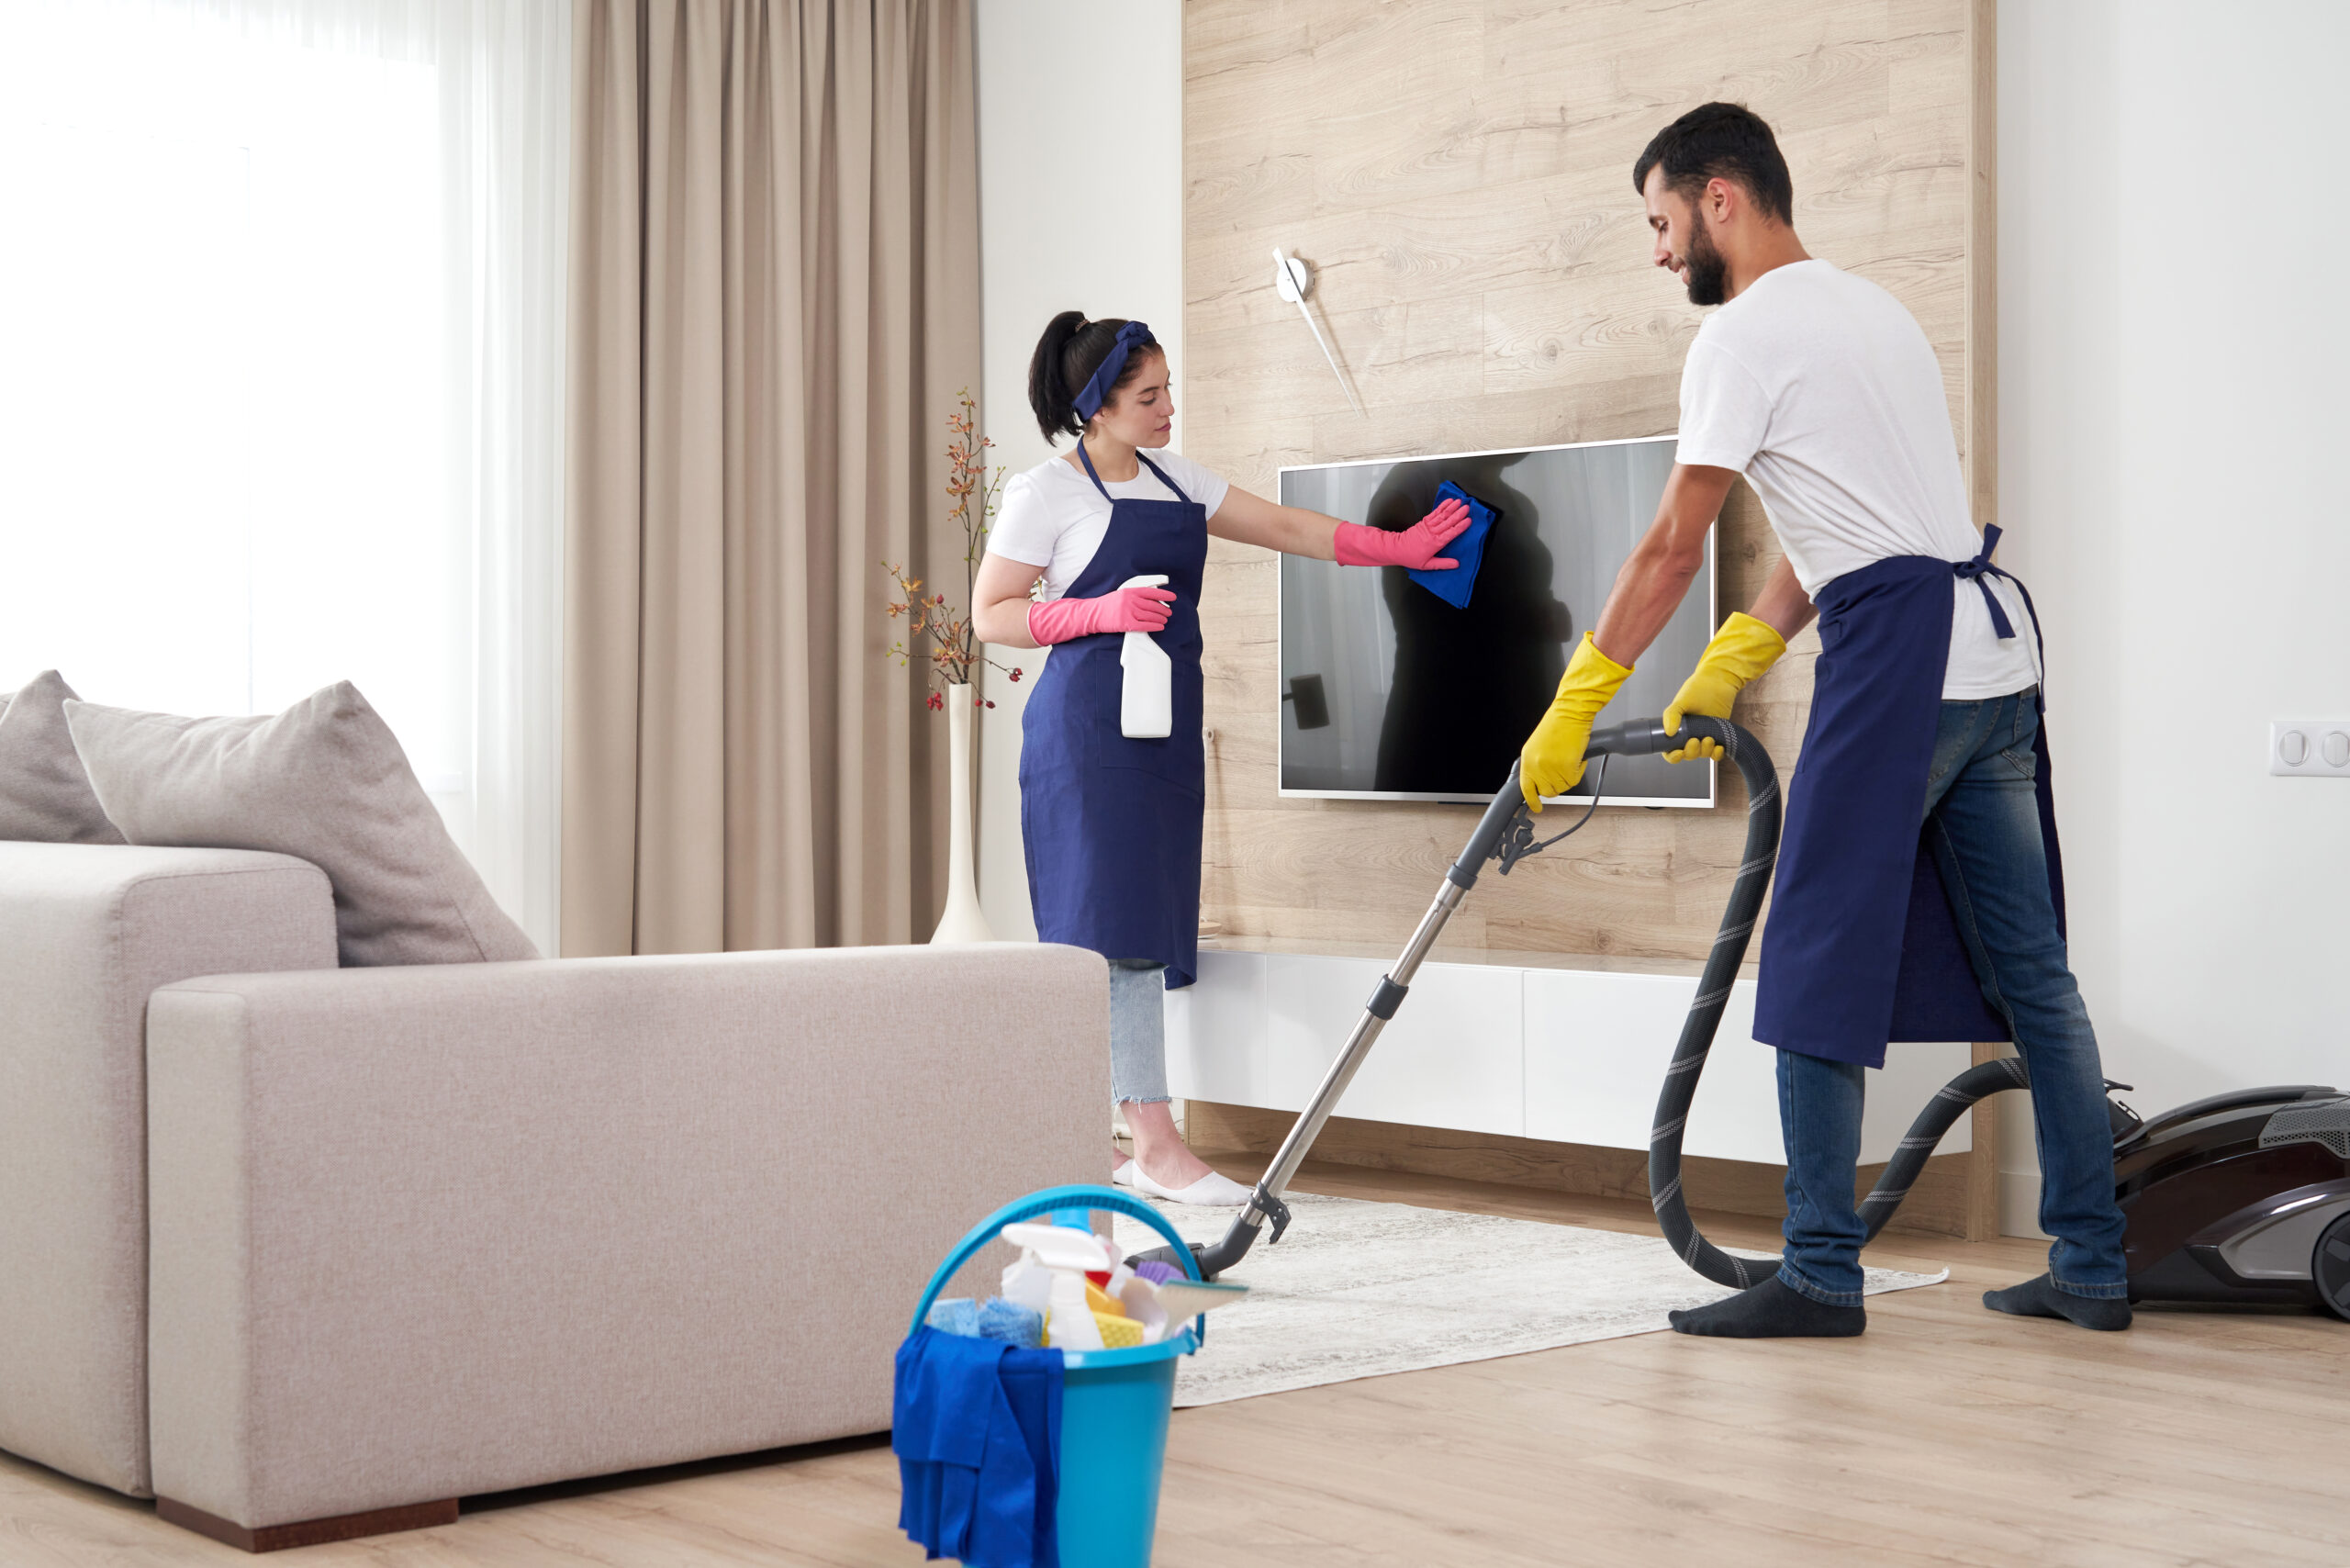 Professional,Cleaning,Service,Team,Cleans,Living,Room,In,Modern,Apartment